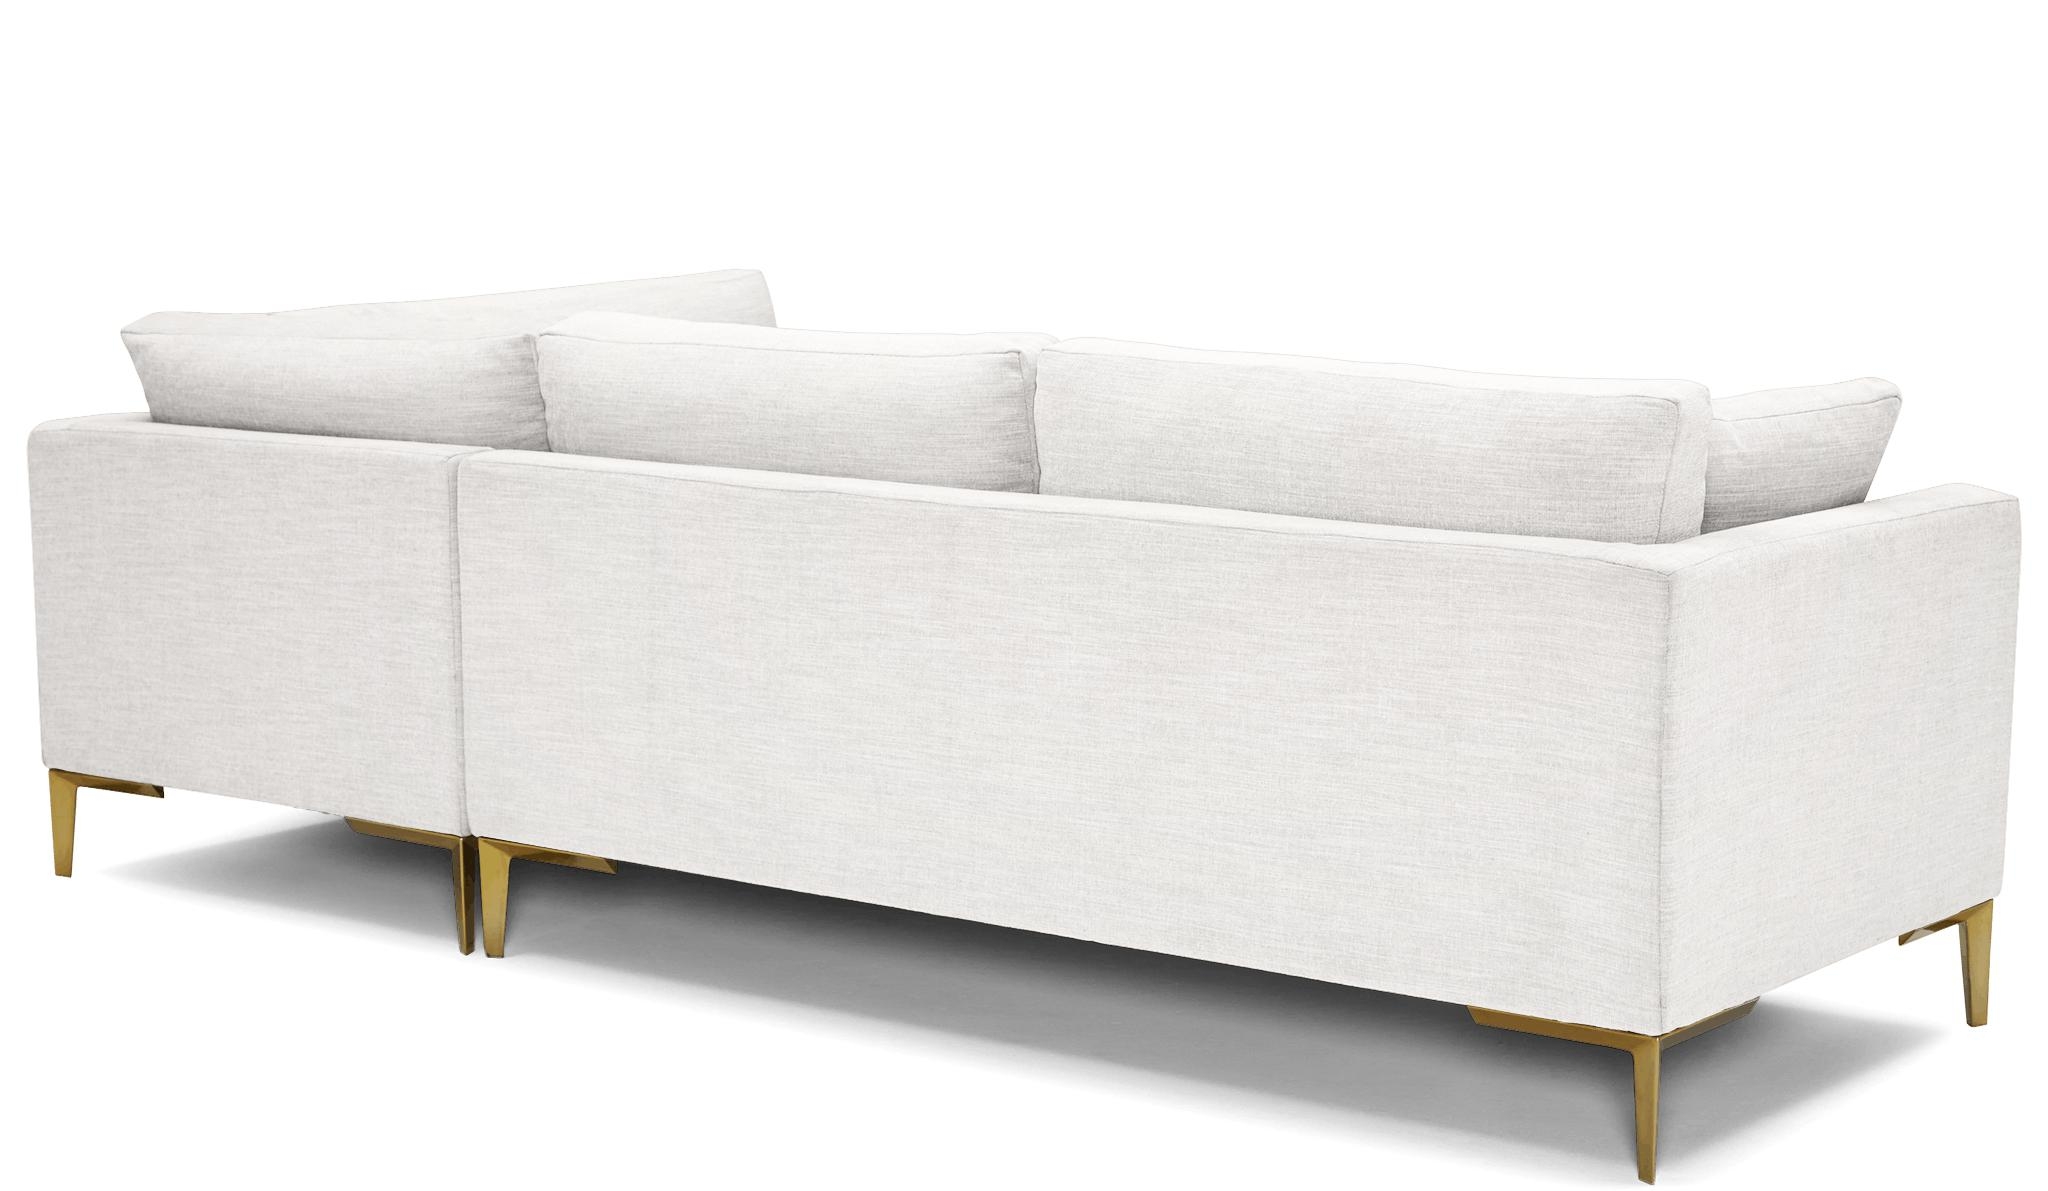 White Ainsley Mid Century Modern Sectional with Bumper - Tussah Blizzard - Left - Image 3